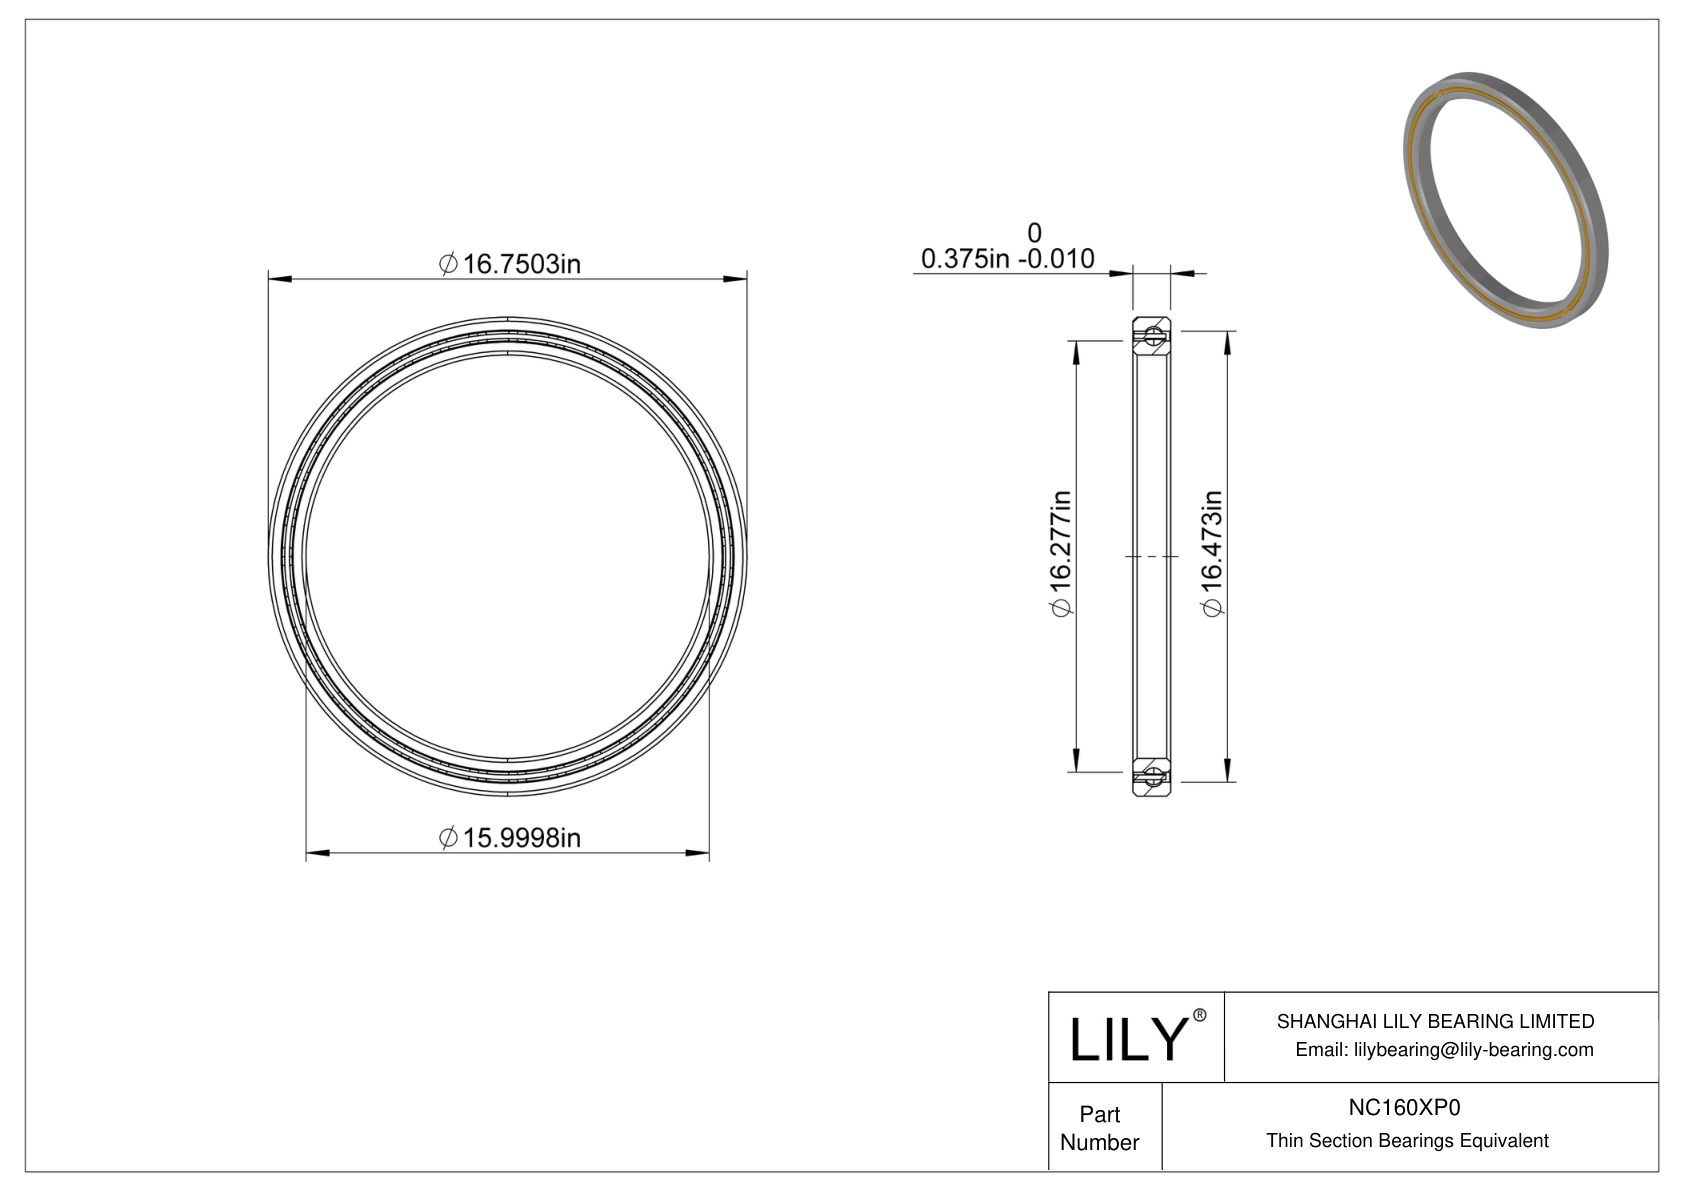 NC160XP0 Constant Section (CS) Bearings cad drawing